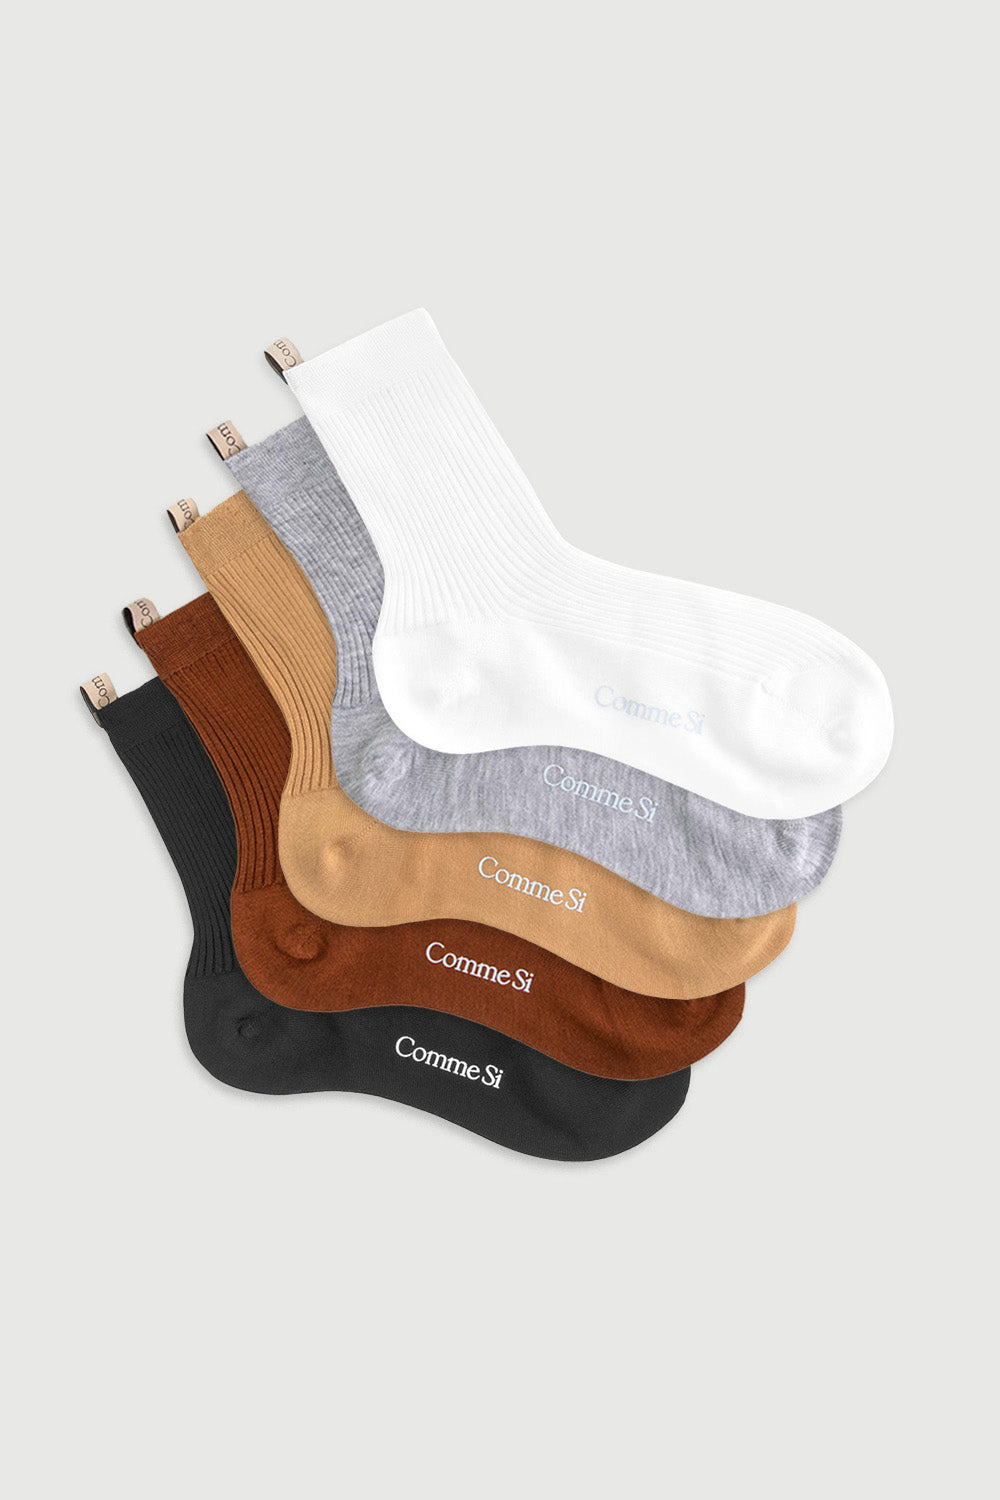 The Agnelli Sock, Cinque set of 5, neutral, Comme Si